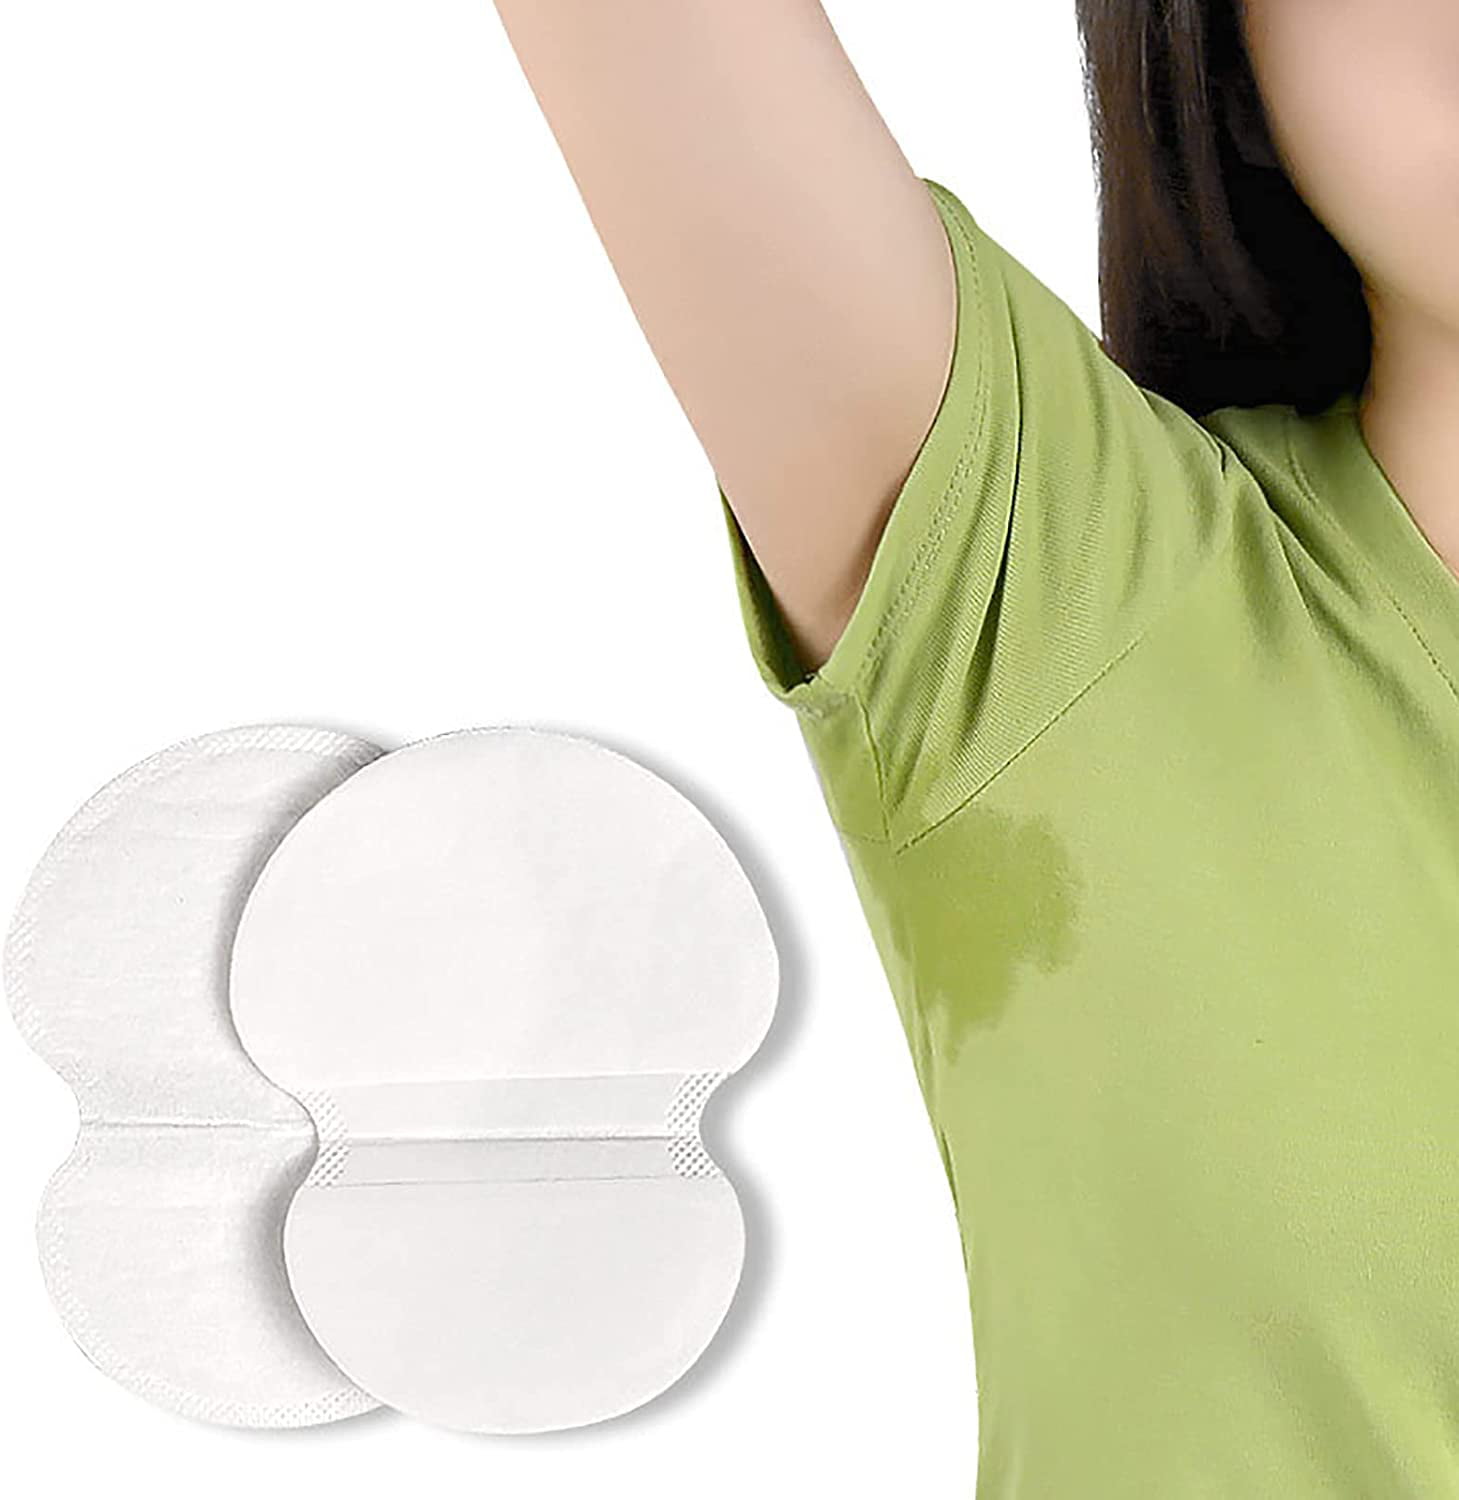 20 SWEAT PADS,DRESS SHIELDS for underarm sweat& stains by AXILLA-shield ™ 